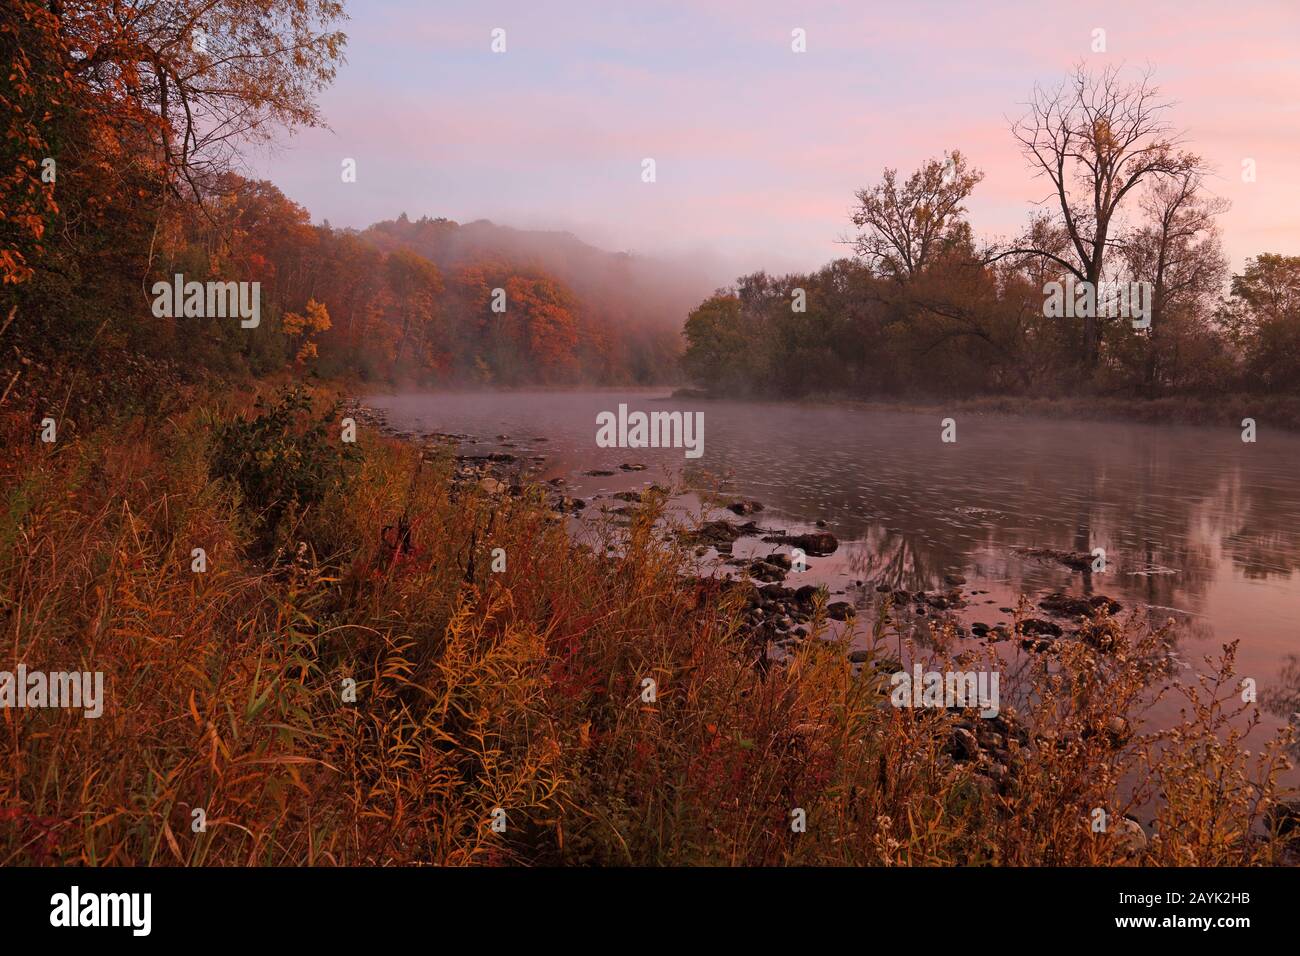 The mist reflecting in the Grand River, shot at daybreak during Autumn, in Kitchener, Ontario, Canada. Stock Photo